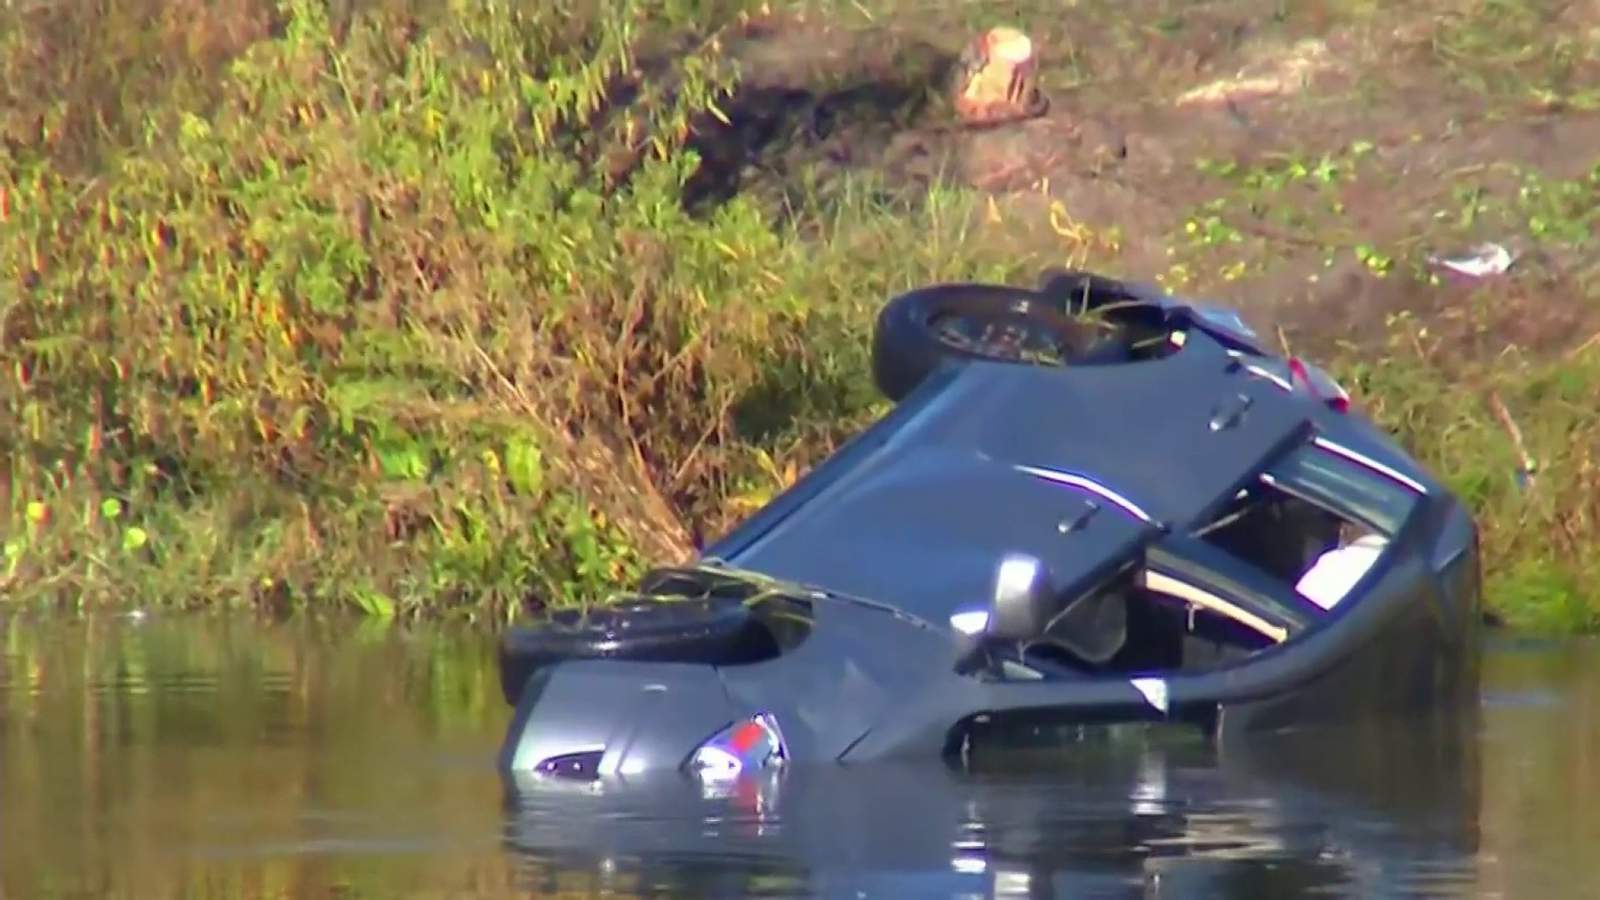 Driver rescued after car flips into lake near I-4 in Orlando